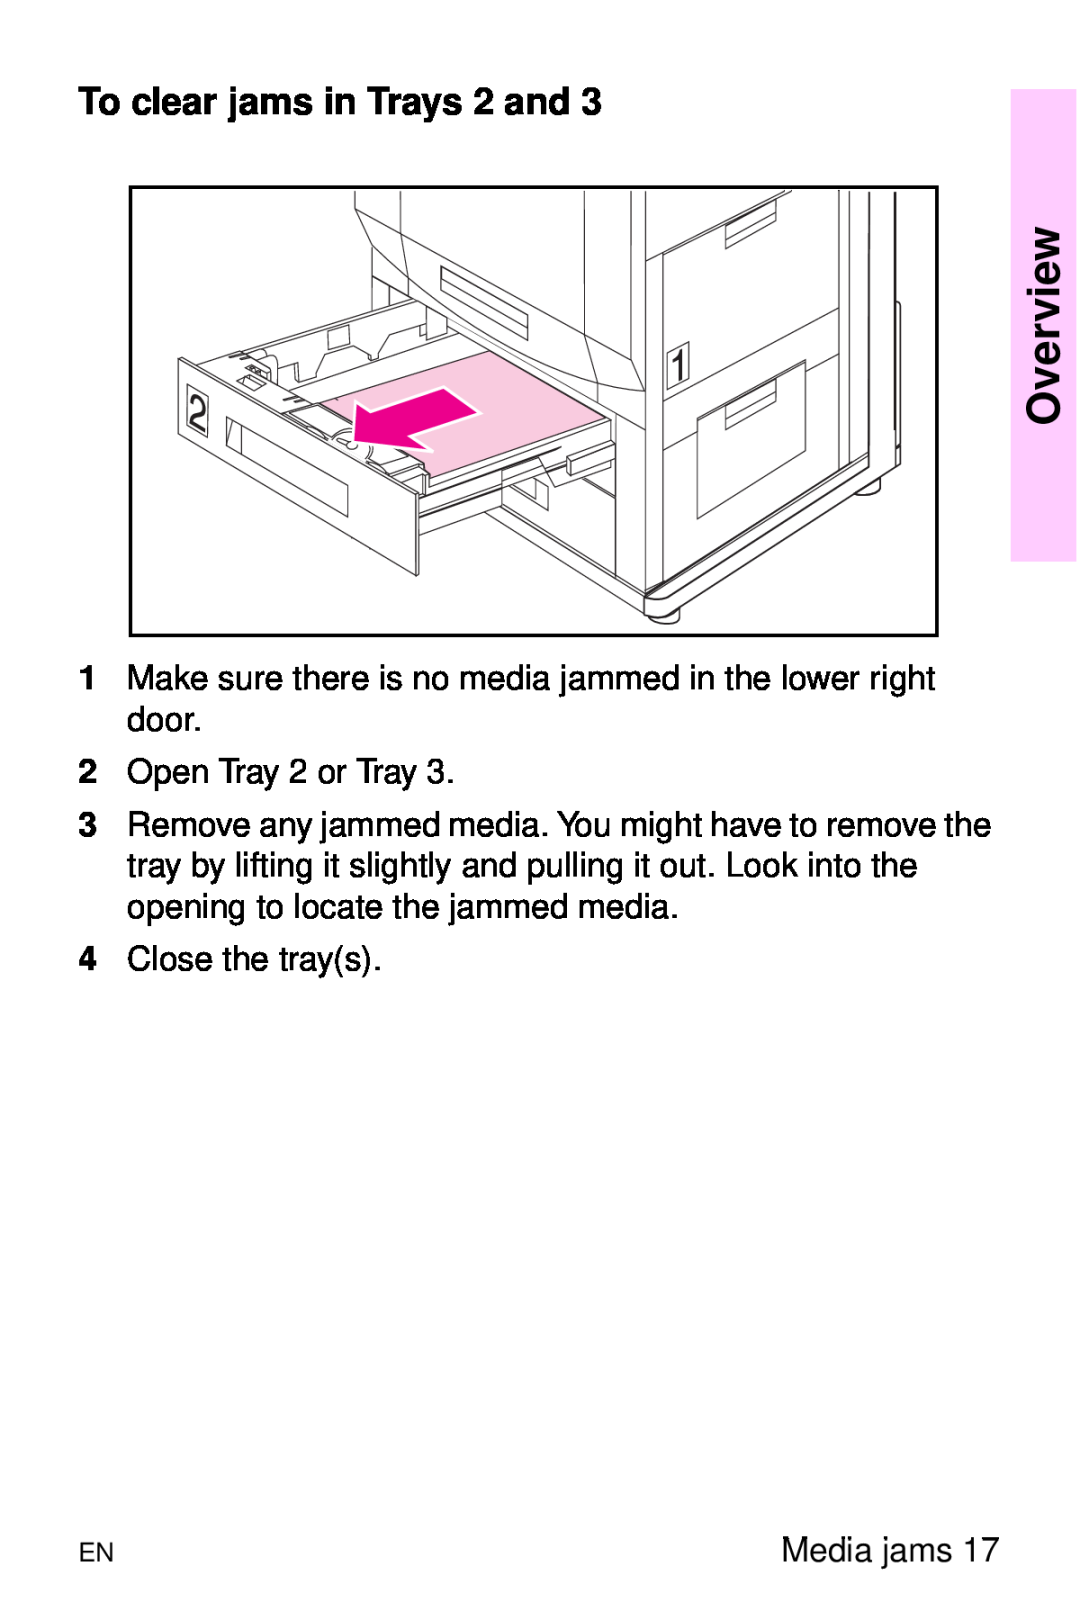 HP 8000 s manual To clear jams in Trays 2 and, Overview, Make sure there is no media jammed in the lower right door 